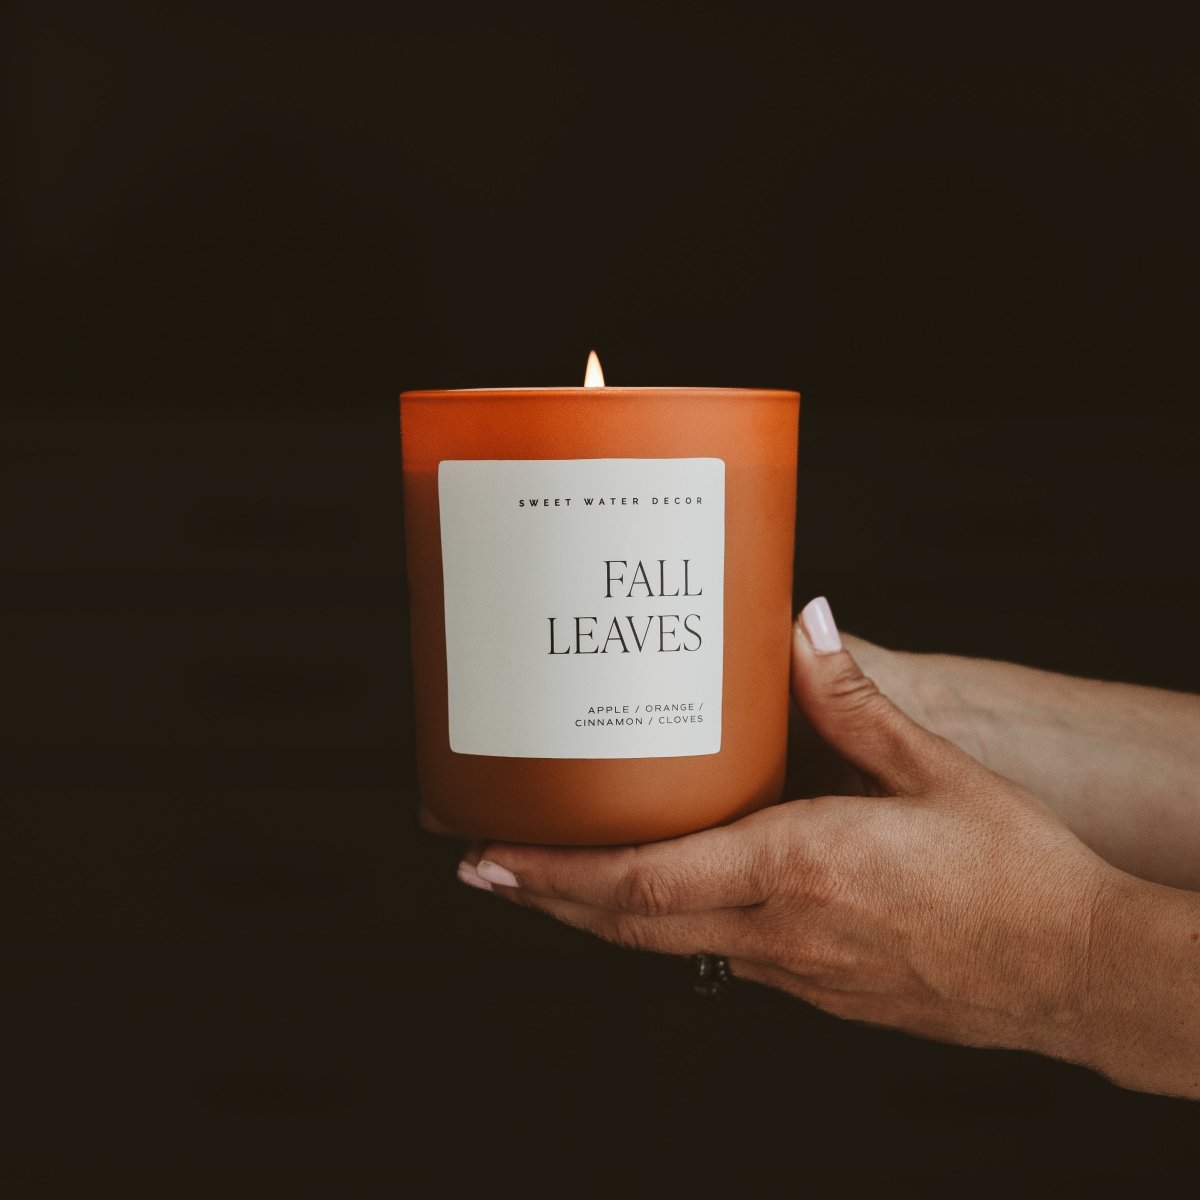 Sweet Water Decor Fall Leaves Soy Candle - Orange Matte Jar - 15 oz - lily & onyx